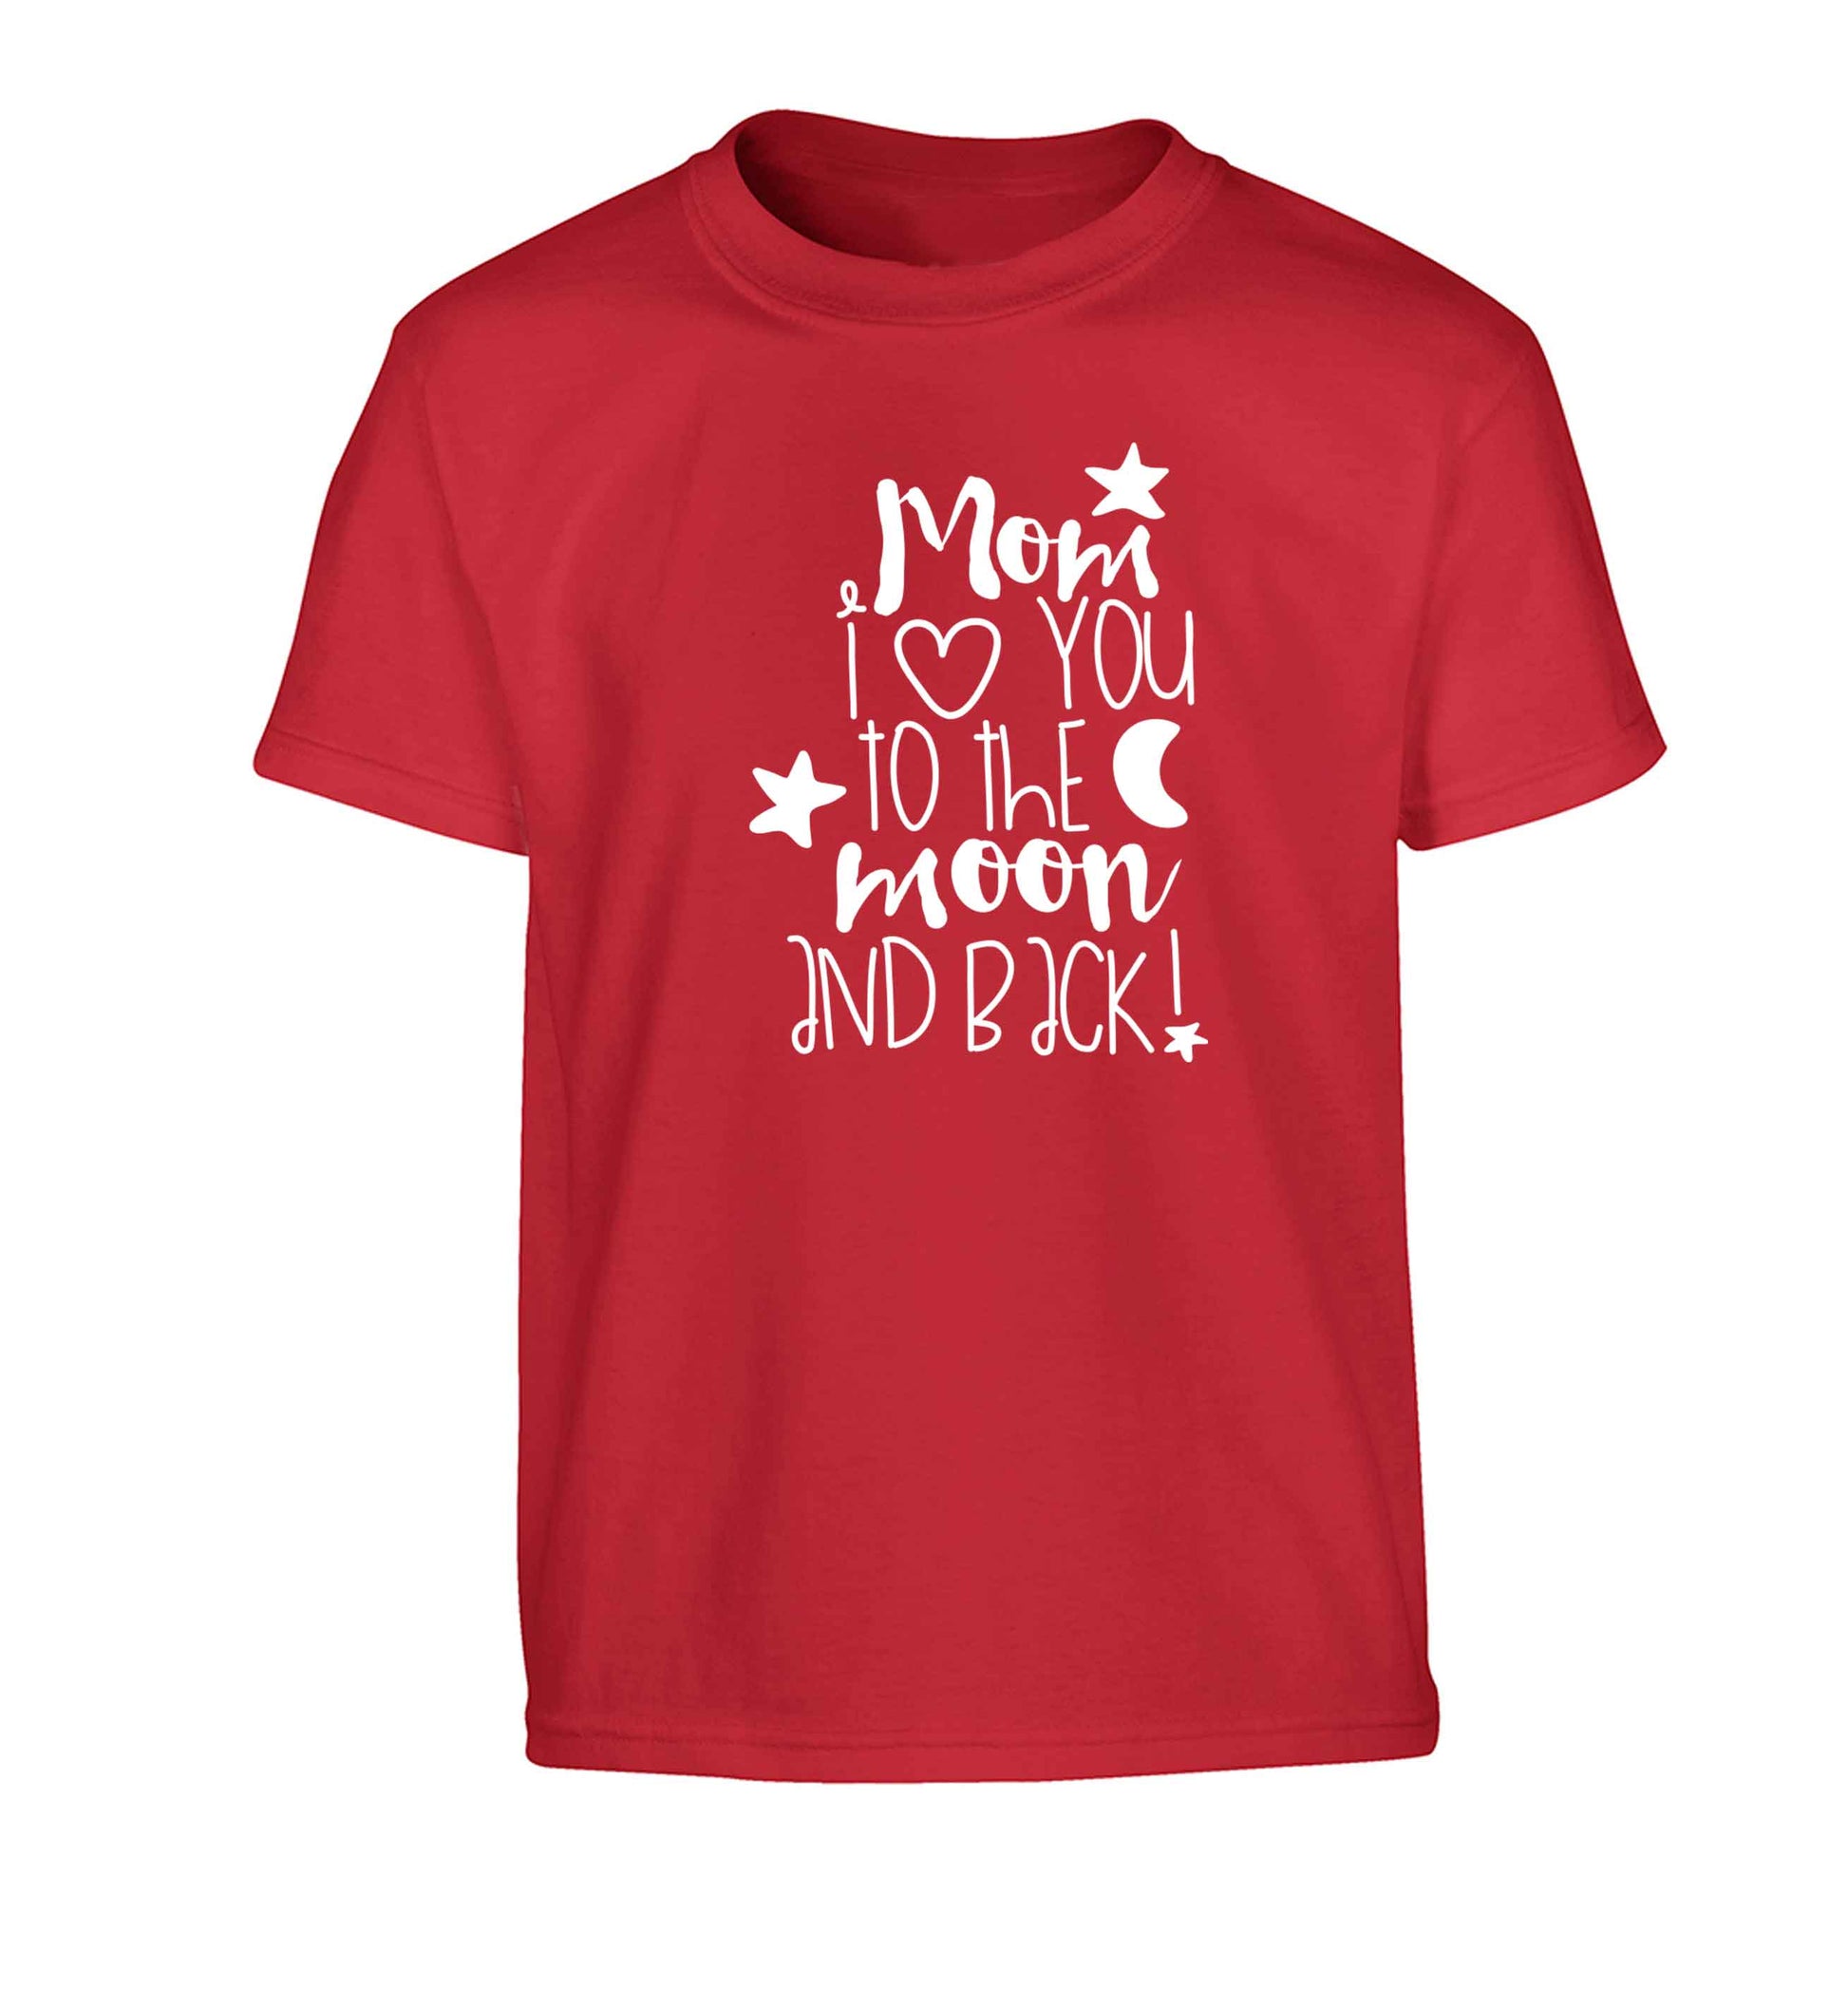 Mom I love you to the moon and back Children's red Tshirt 12-13 Years